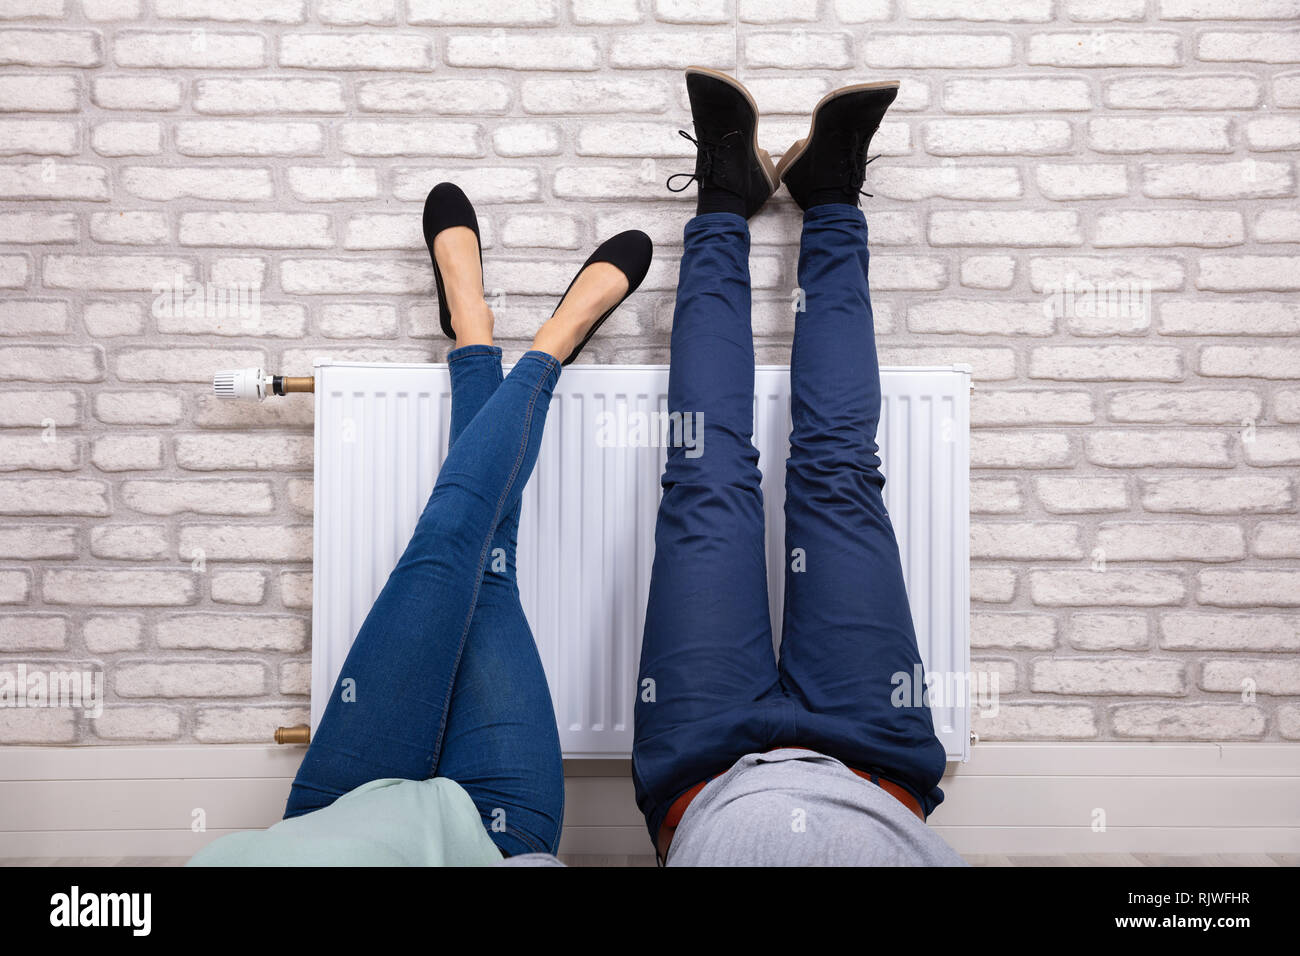 Close-up Of A Couple Warming Up Their Feet On White Radiator At Home Stock Photo